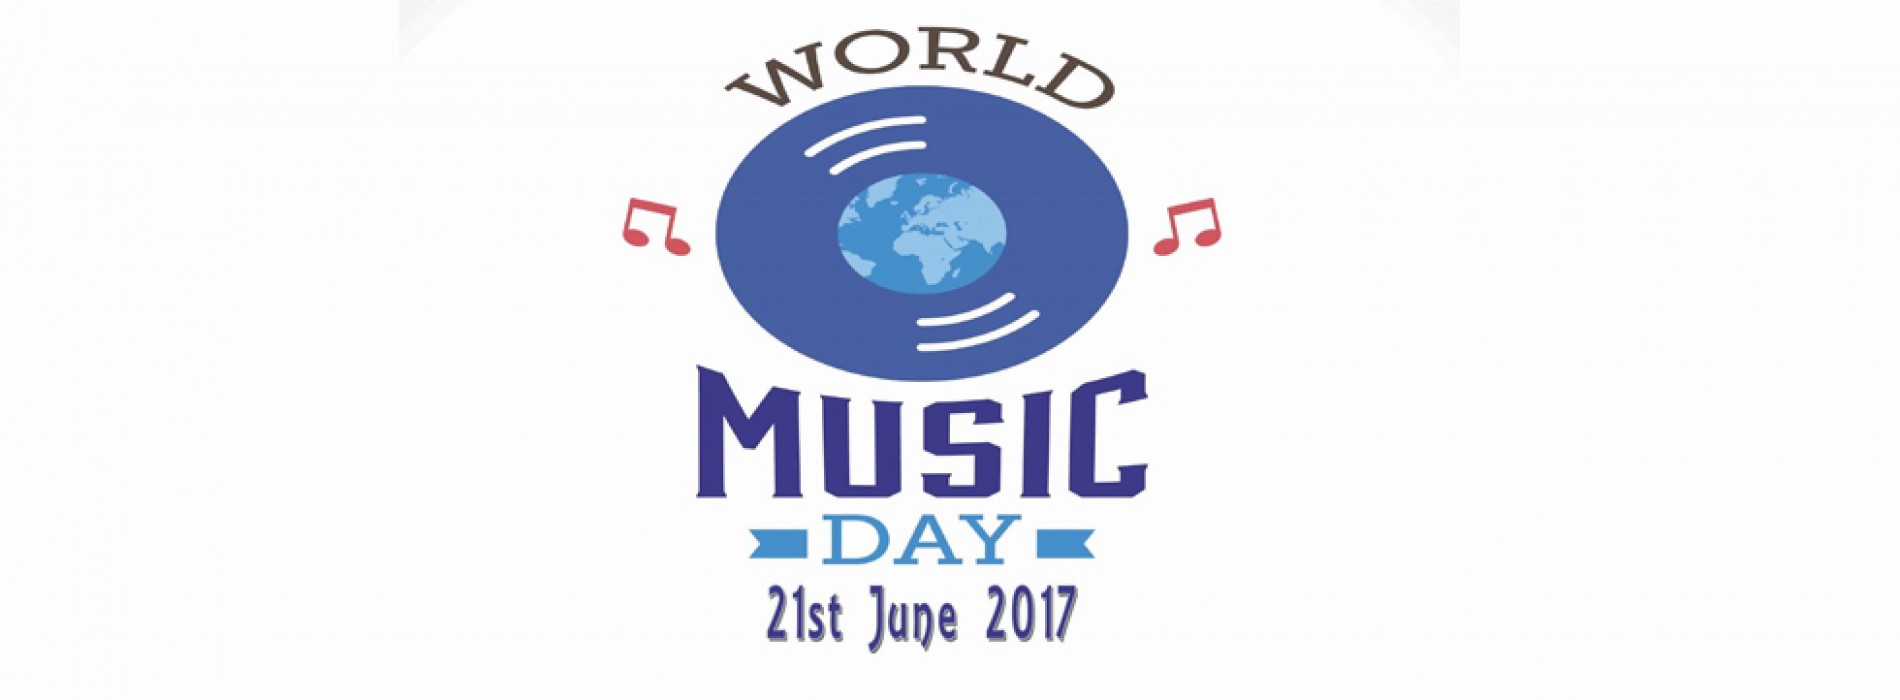 Goa to be developed as Music Festival Destination: Minister for Tourism Ajgaonkar on World Music Day June 21